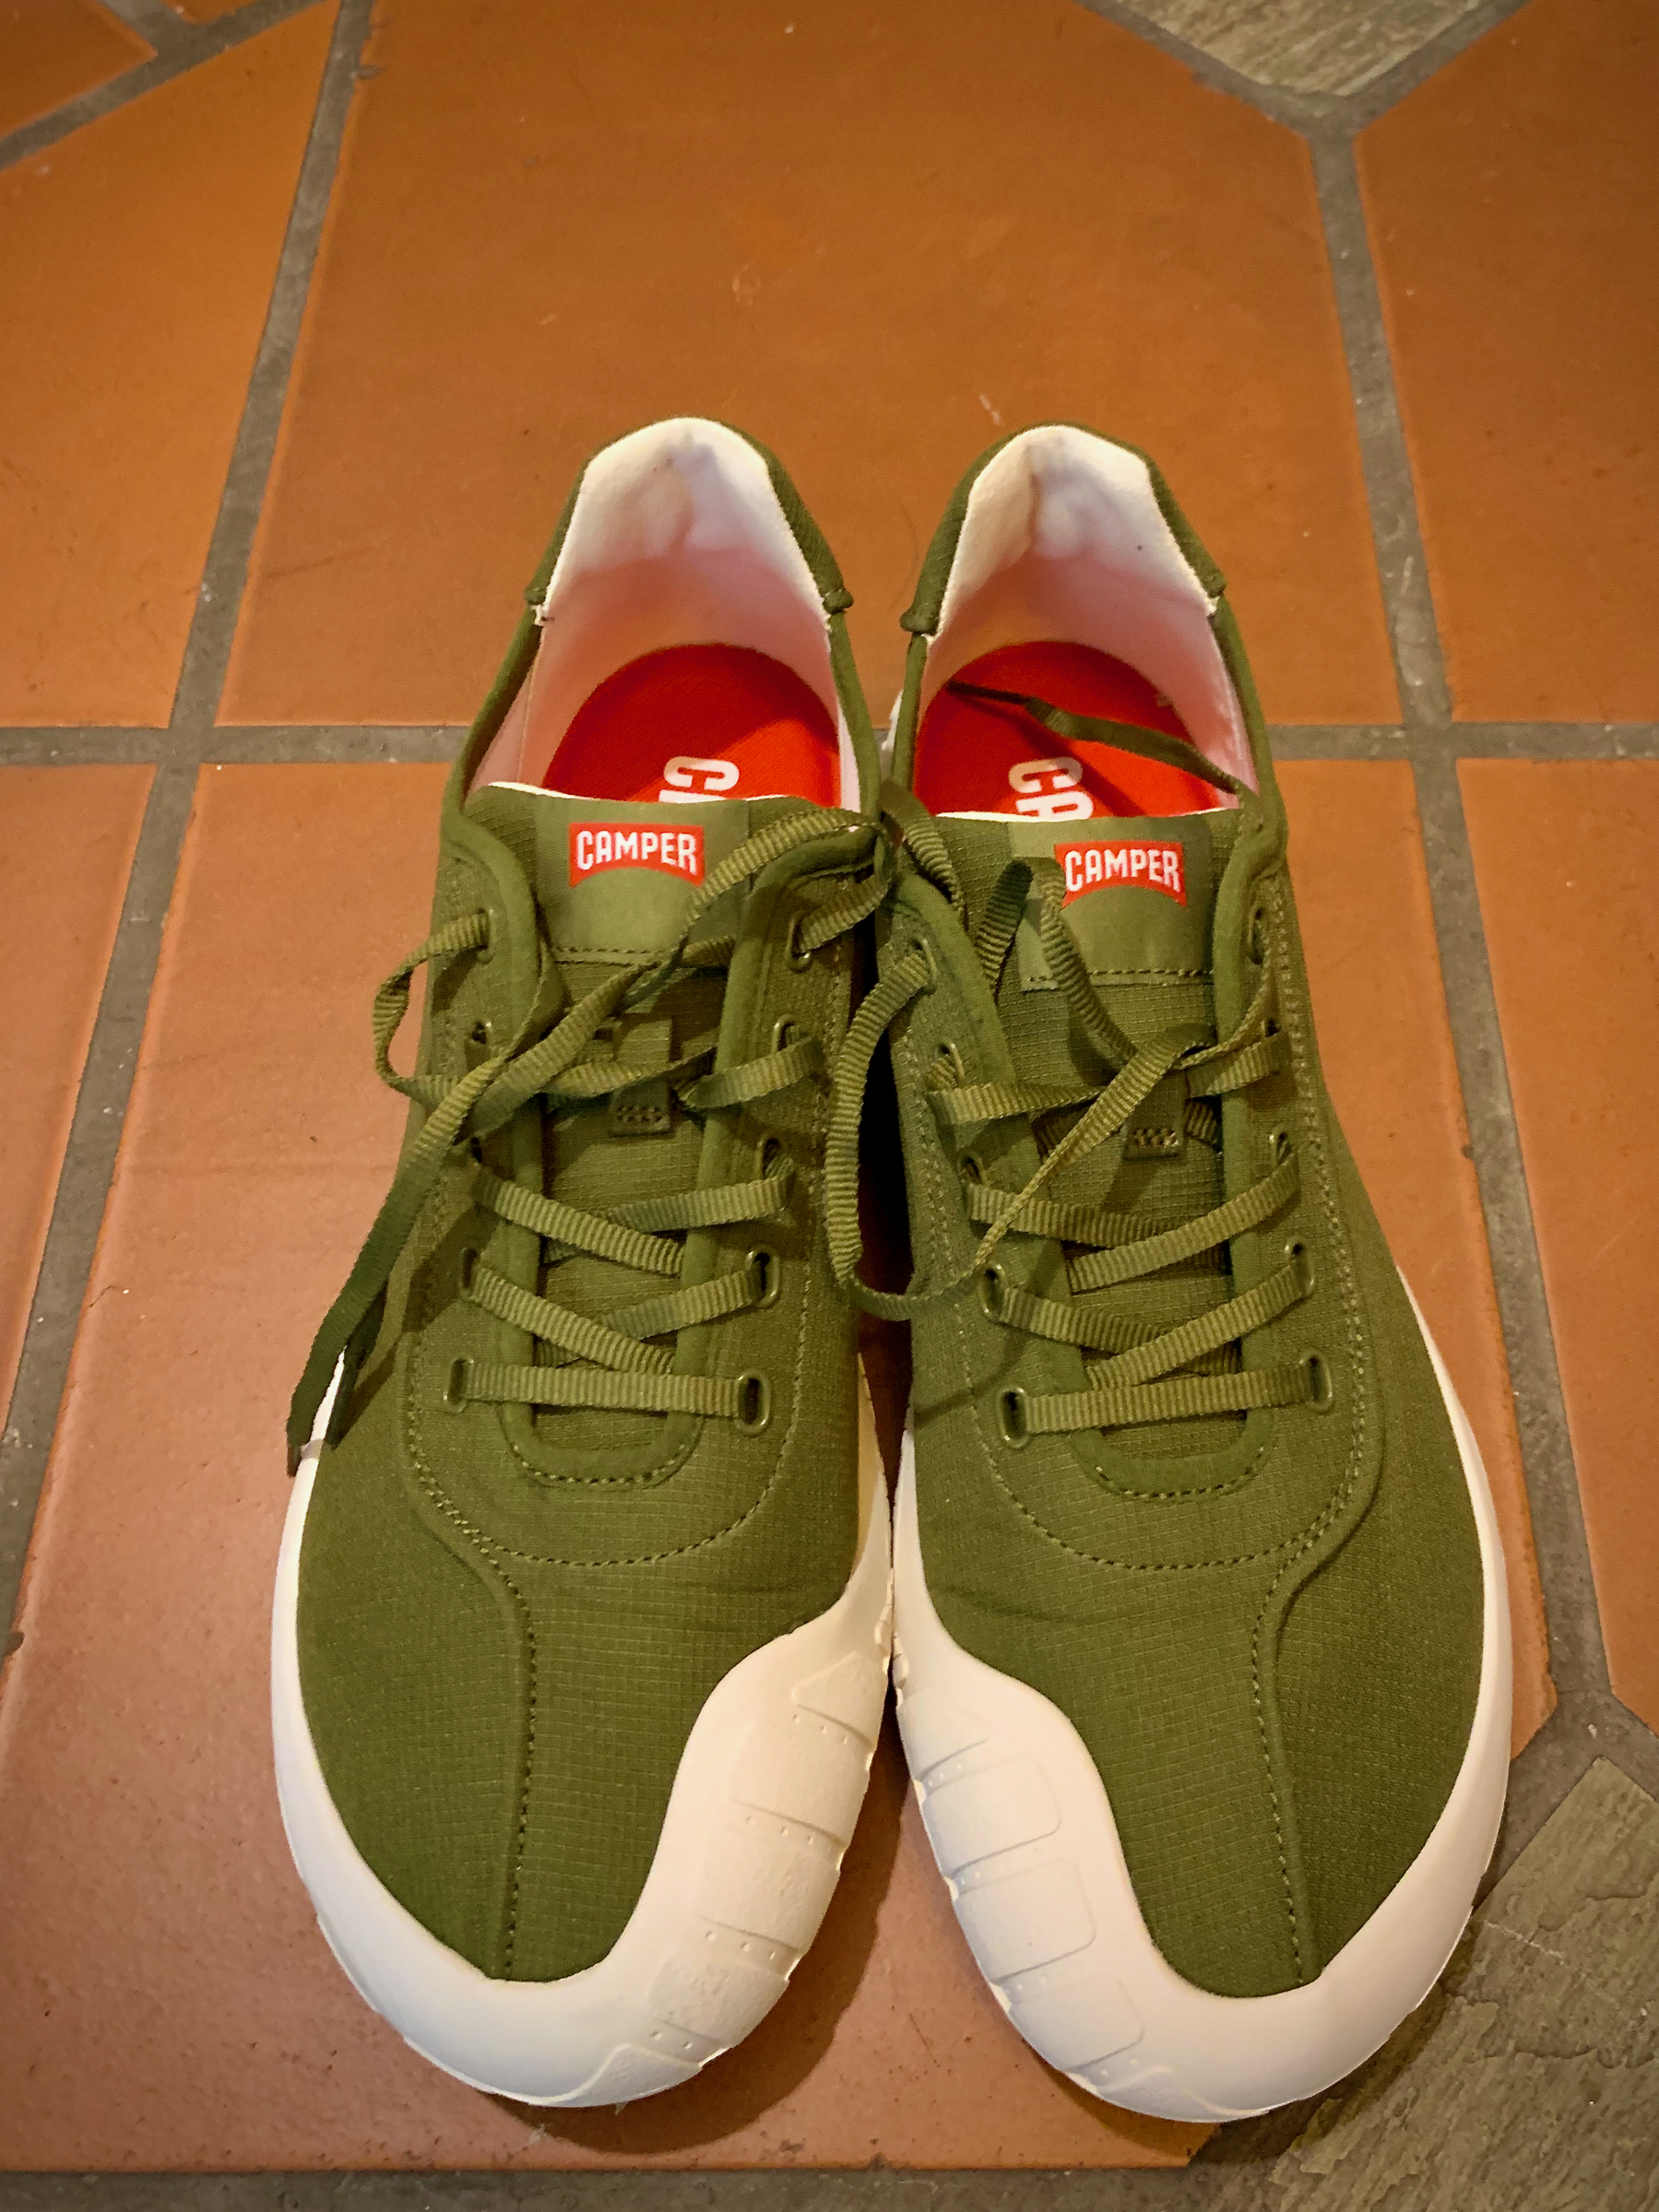 A pair of green sneakers with white soles from a brand named Camper, placed on red floor tiles